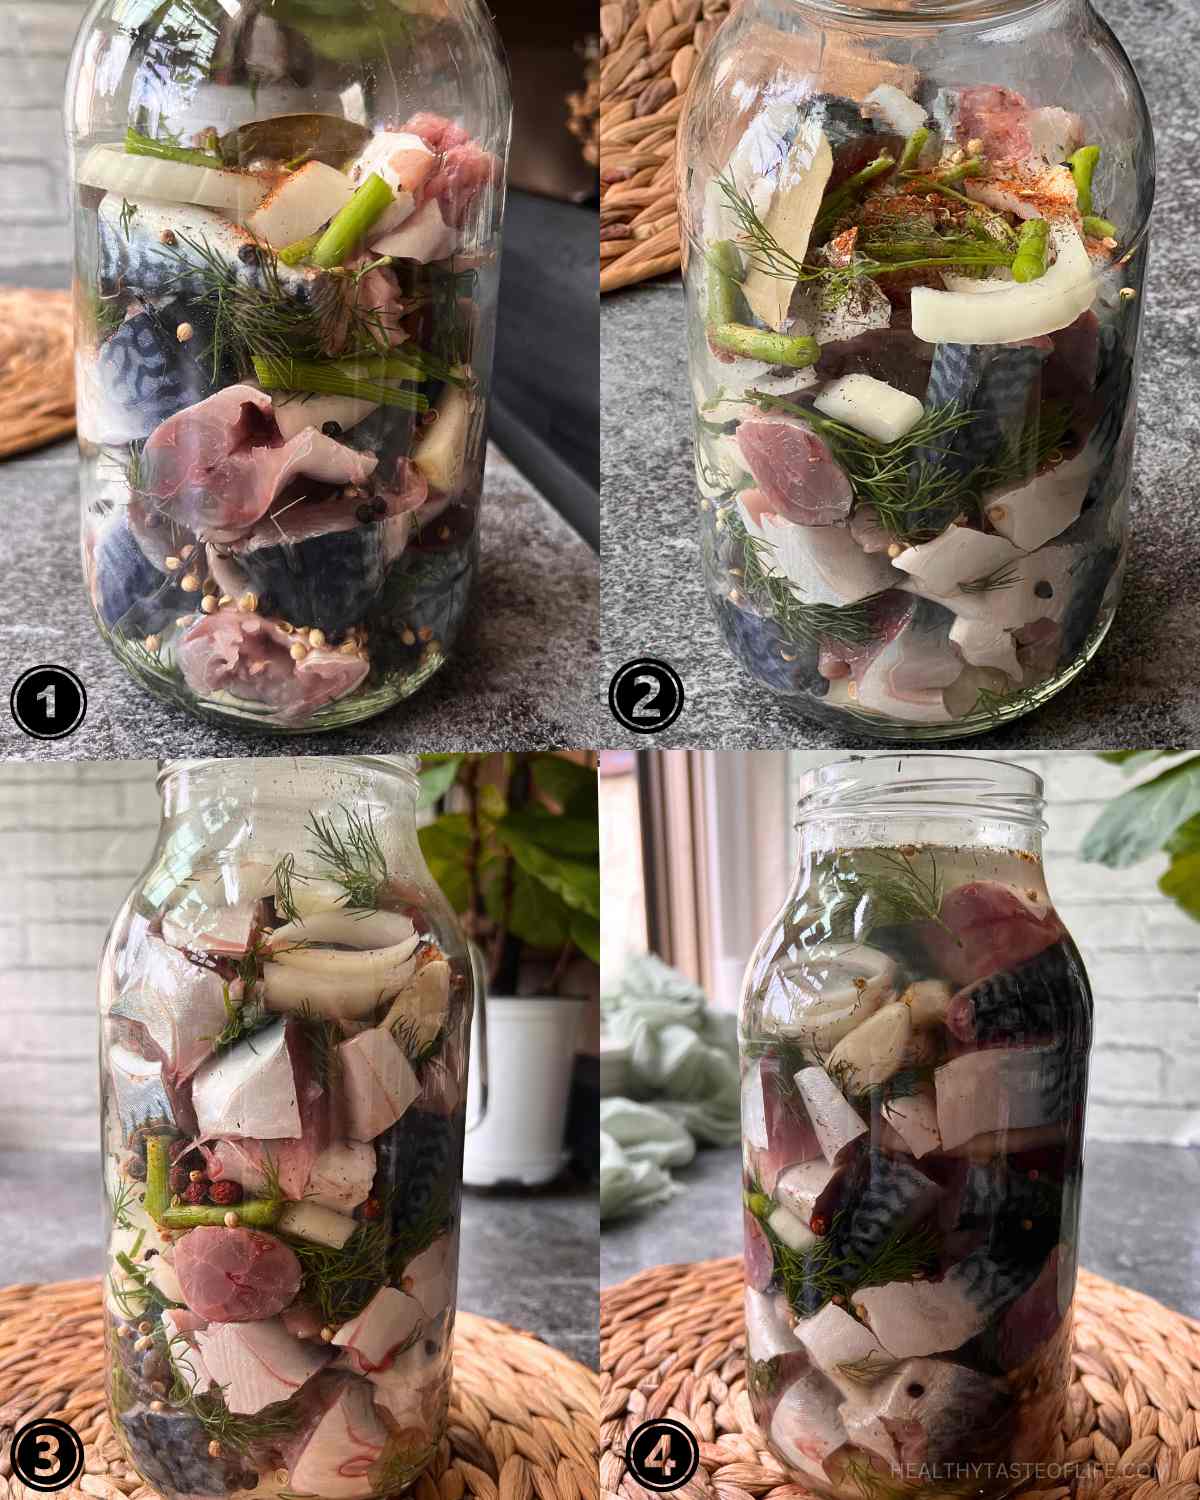 Process photo showing steps how to arrange the fish along with seasoning in a jar for fermentation.